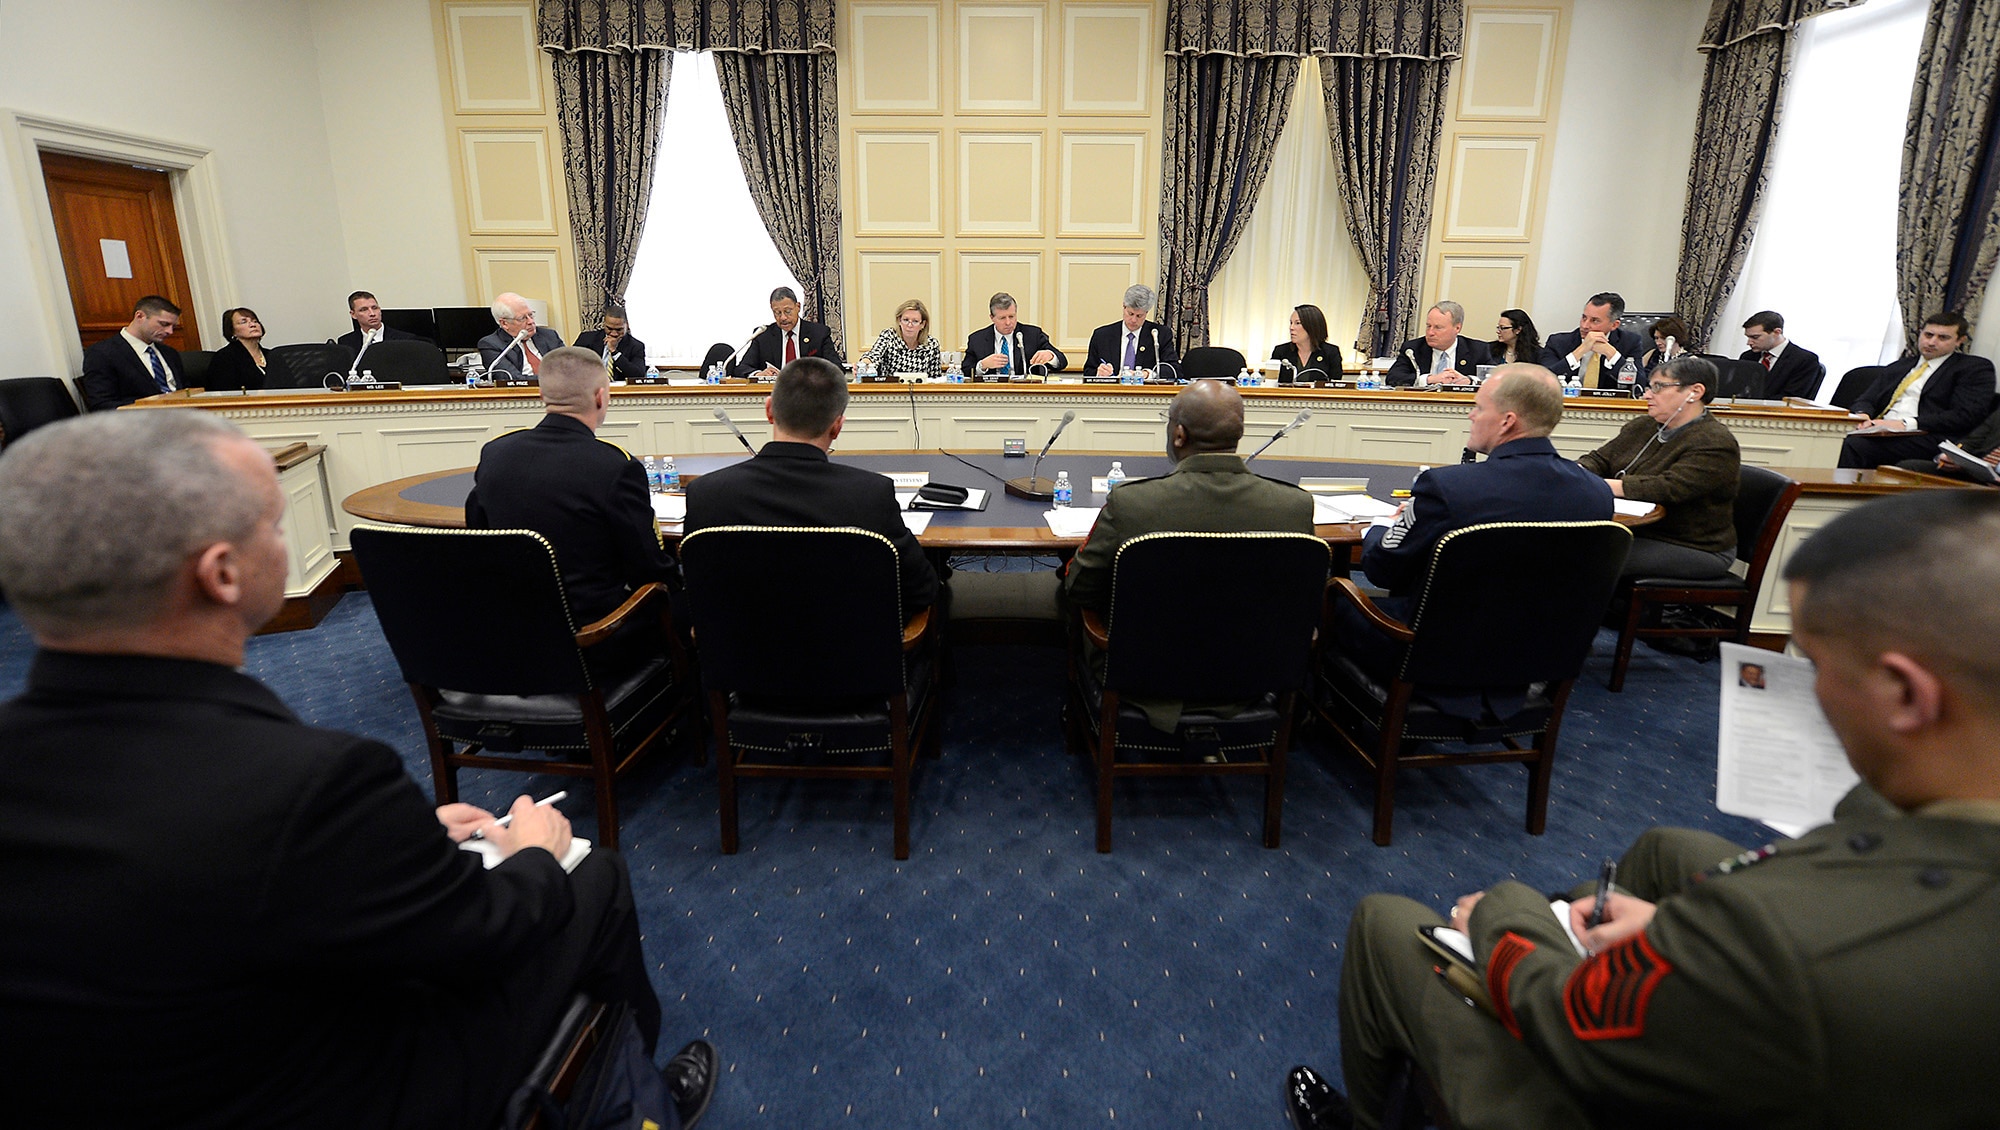 Chief Master Sgt. of the Air Force James A. Cody testifies before the House's Committee on Appropriations Subcommittee on Military Construction and Veterans Affairs in Washington, D.C., Feb. 25, 2015. As part of his testimony, Cody spoke about the challenge of last year's force reductions and the impact of fiscal uncertainty on the force while facing global demands and geopolitical realities. In addition to Cody, the other witnesses were Sgt. Maj. of the Army Daniel A. Dailey, Master Chief Petty Office of the Navy Michael D. Stephens, and Sgt. Maj. of the Marine Corps Ronald Green. (U.S. Air Force photo/Scott M. Ash)